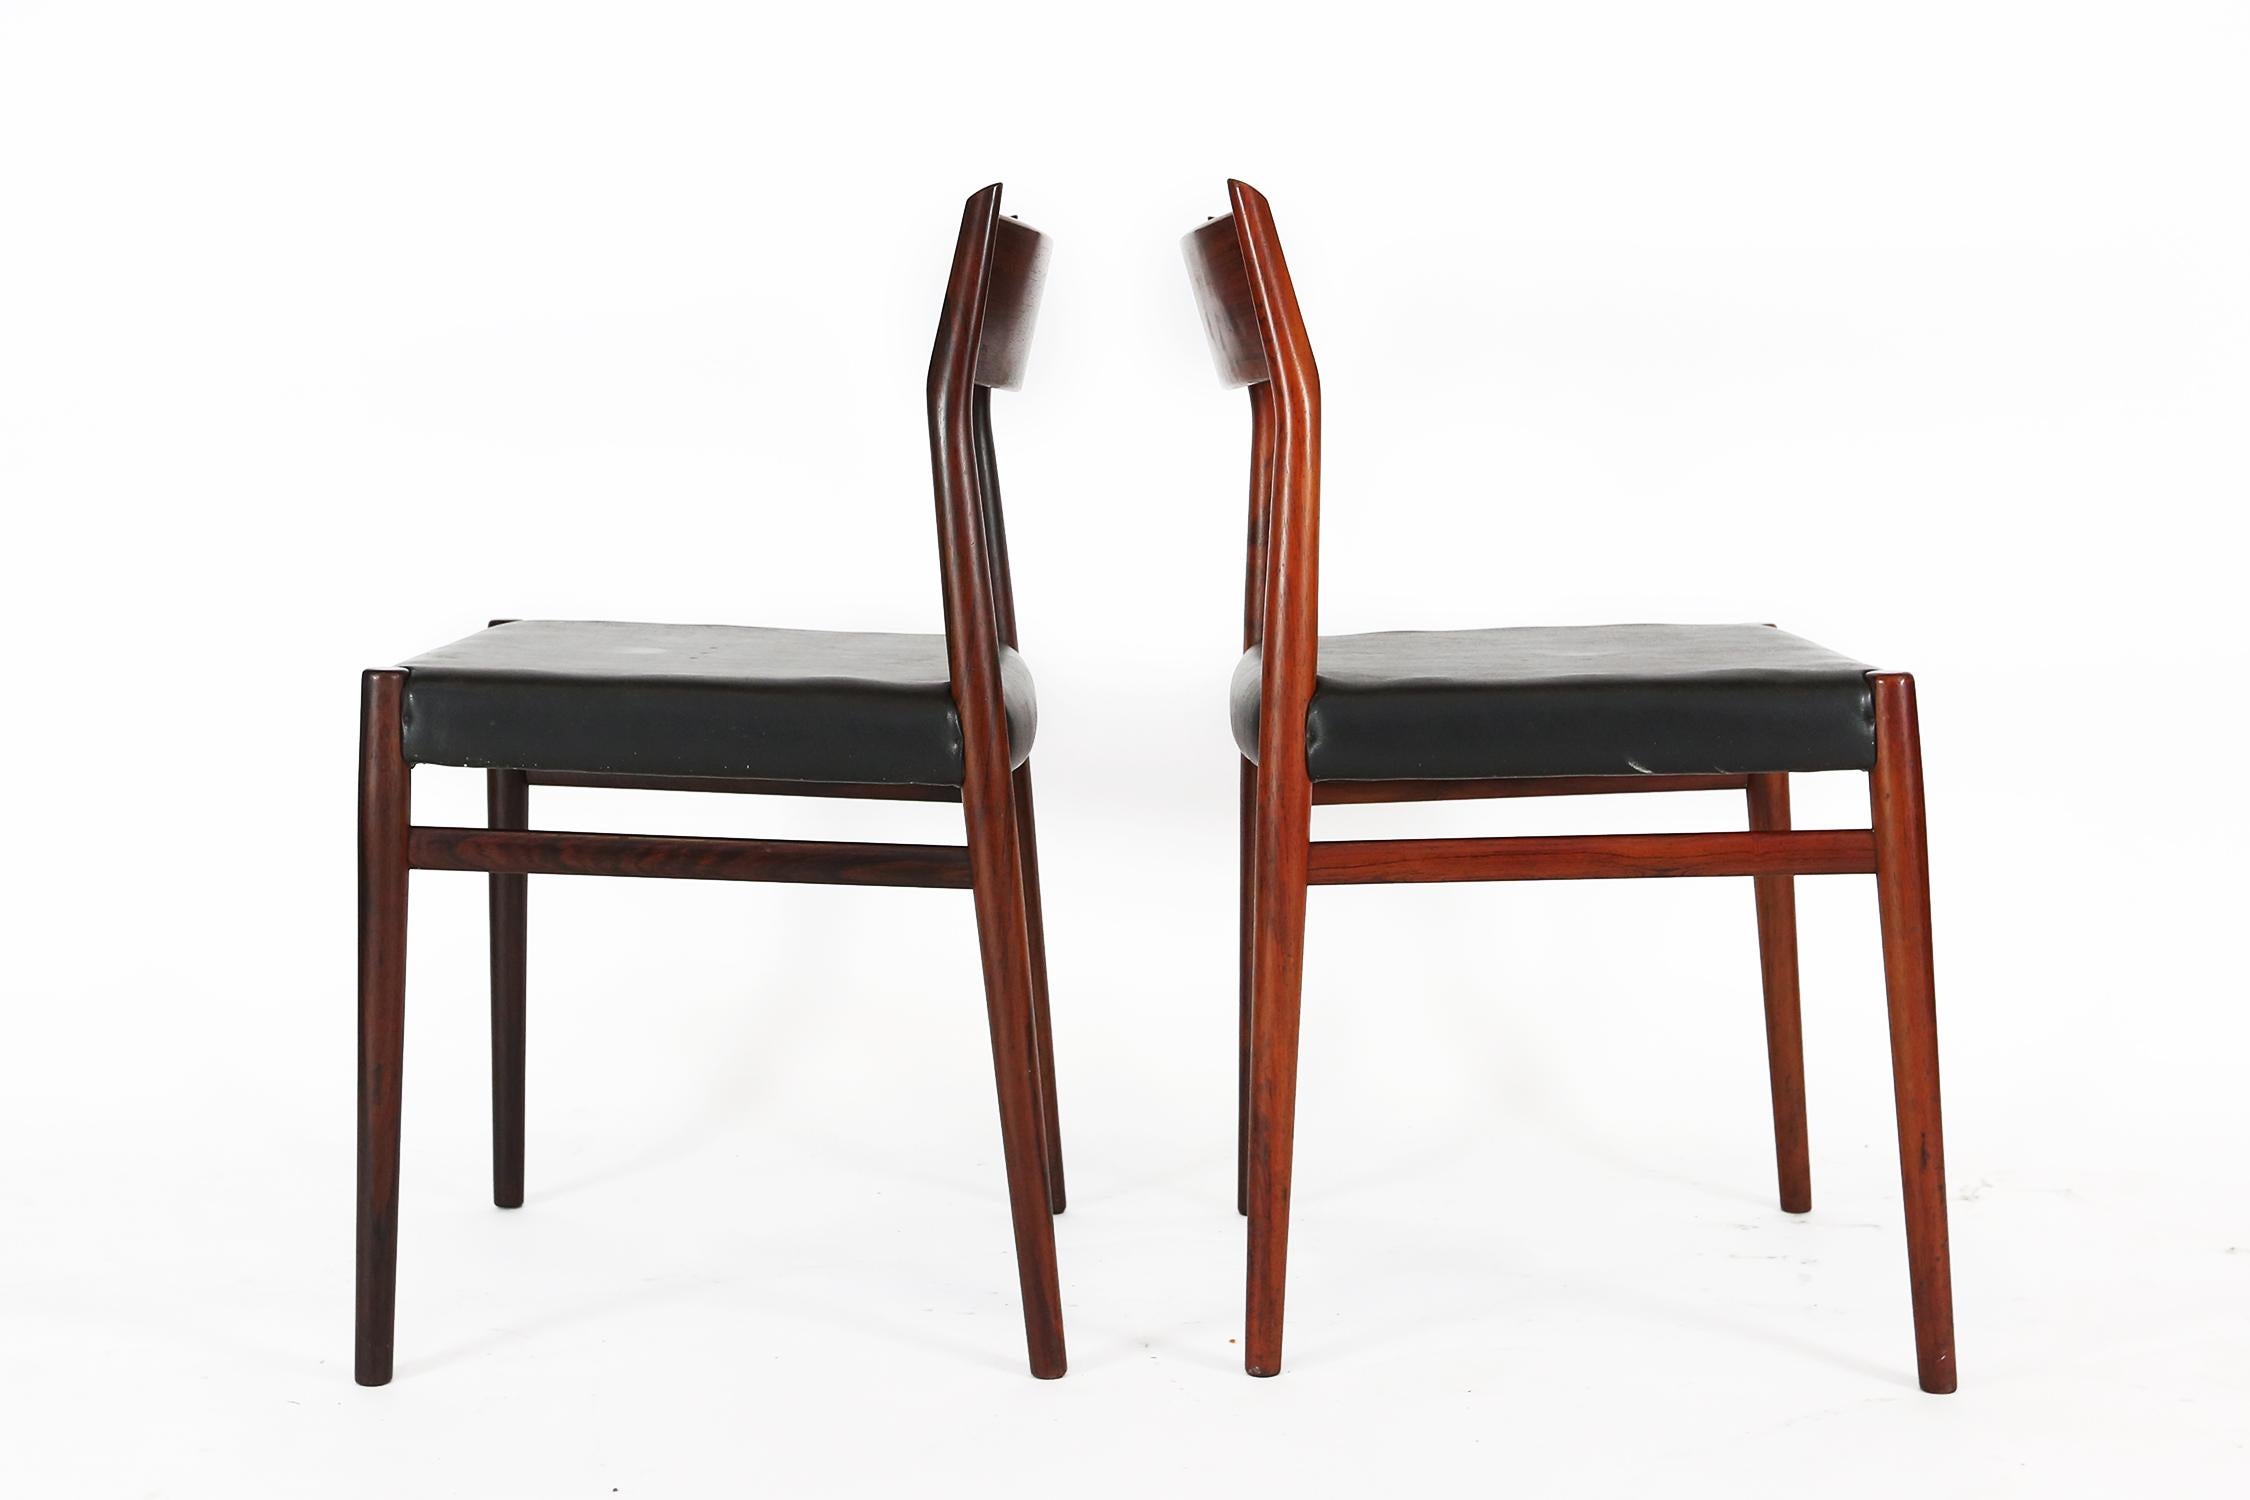  Arne Vodder Set of 8 Dining Chairs Model 418 Sibast Mobler, 1965 In Good Condition For Sale In Ghent, BE